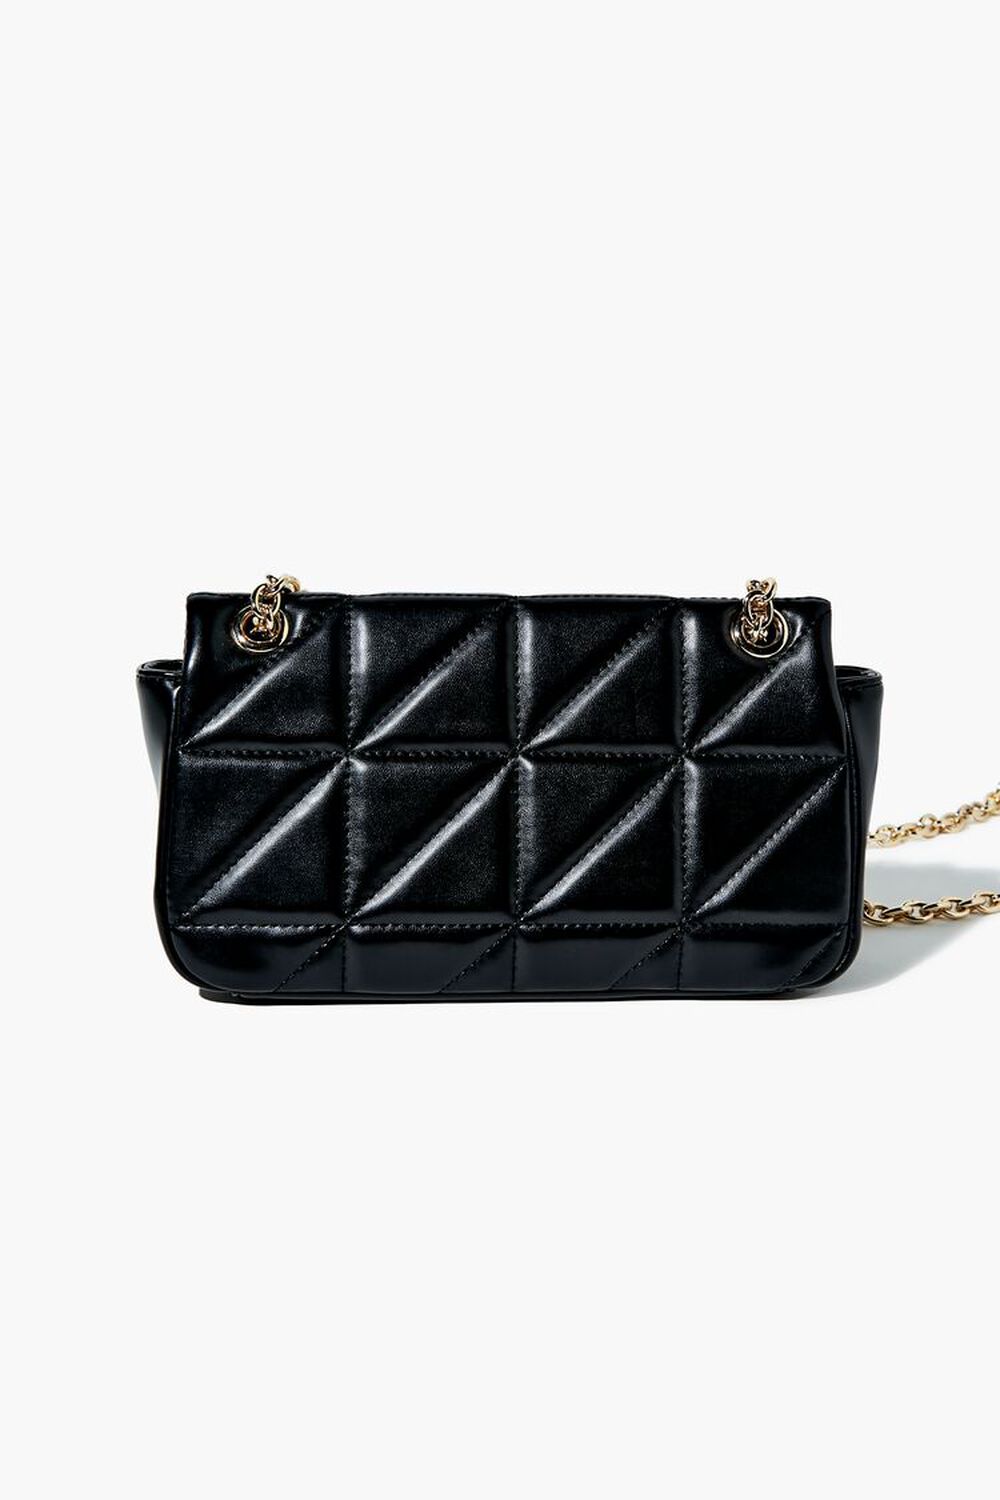 French Connection Chain Quilted Shoulder Bag in Black - ASOS Outlet